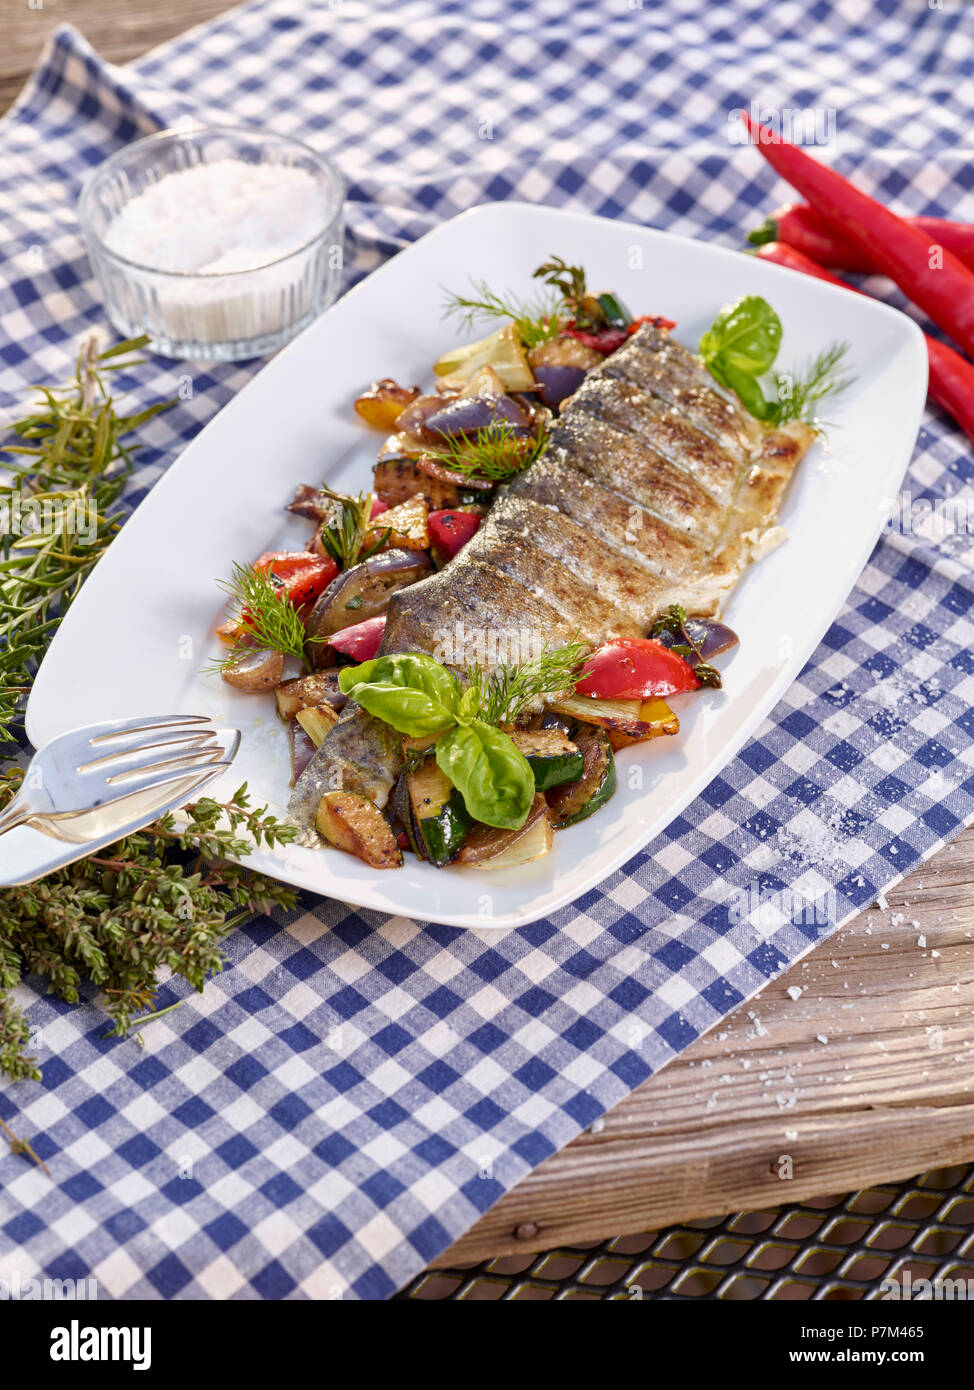 grilled trout fillet with Mediterranean vegetables Stock Photo